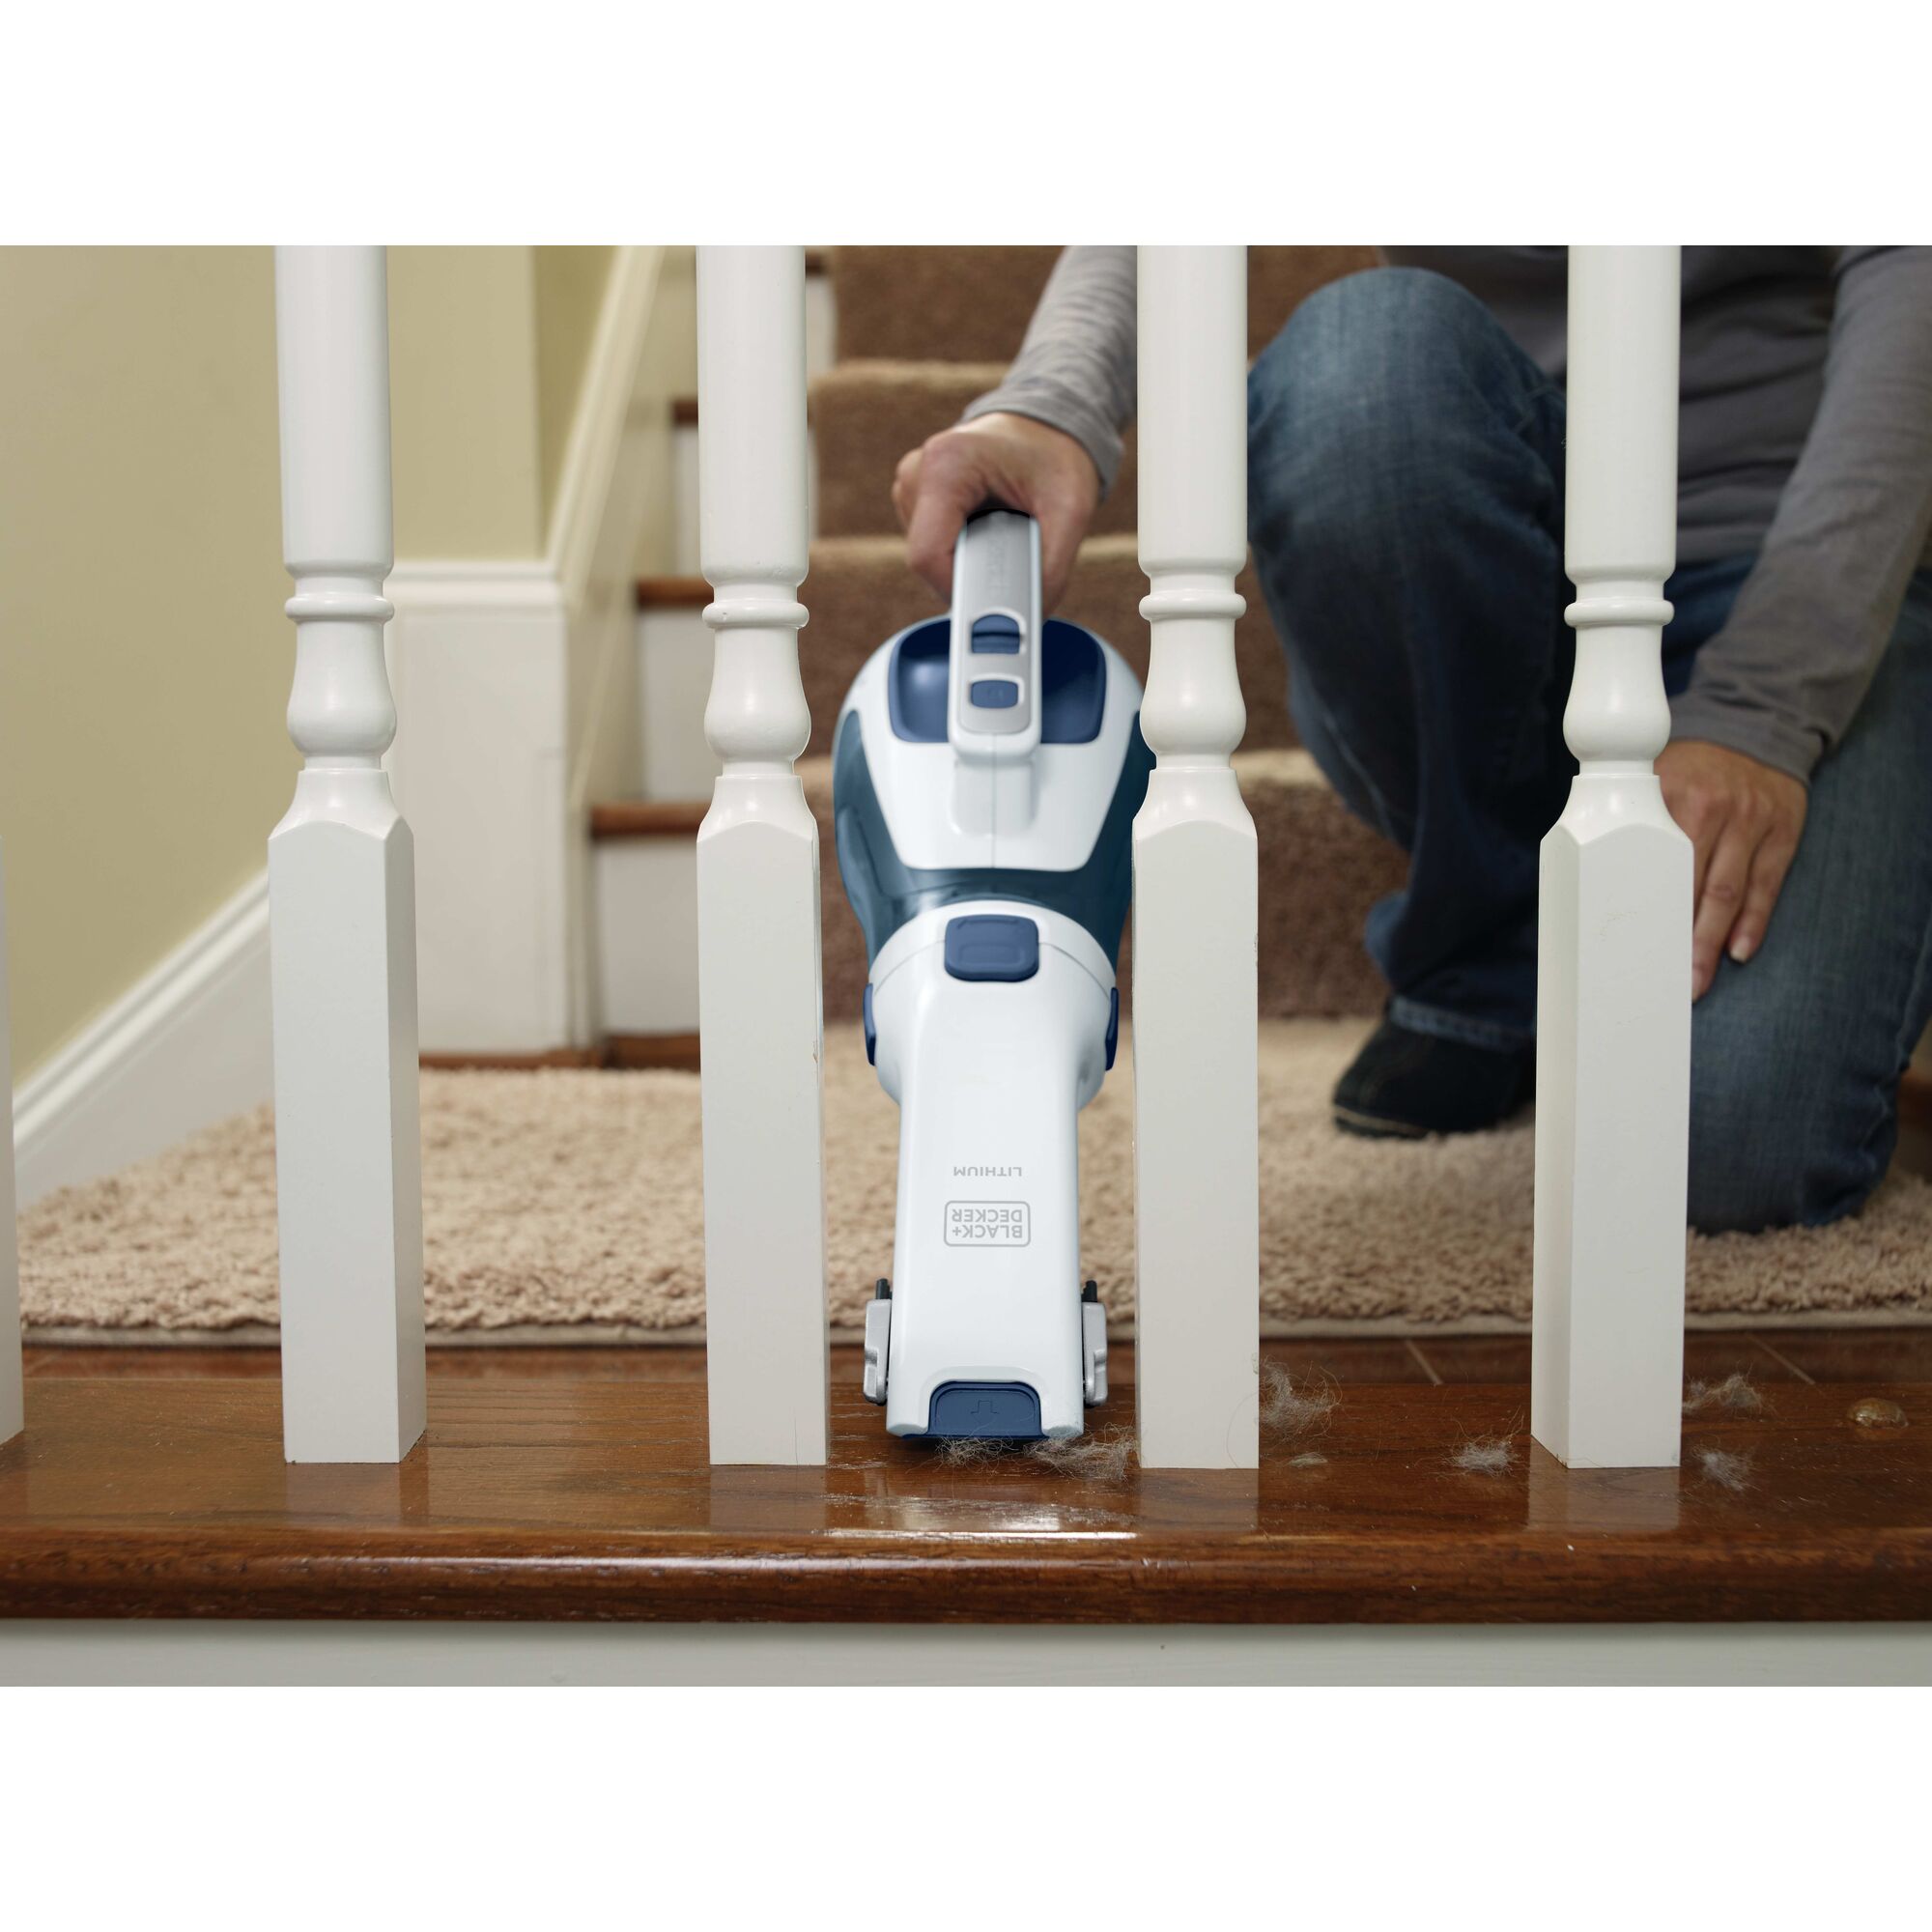 dustbuster Cordless Hand Vacuum being used to collect fur from floor.